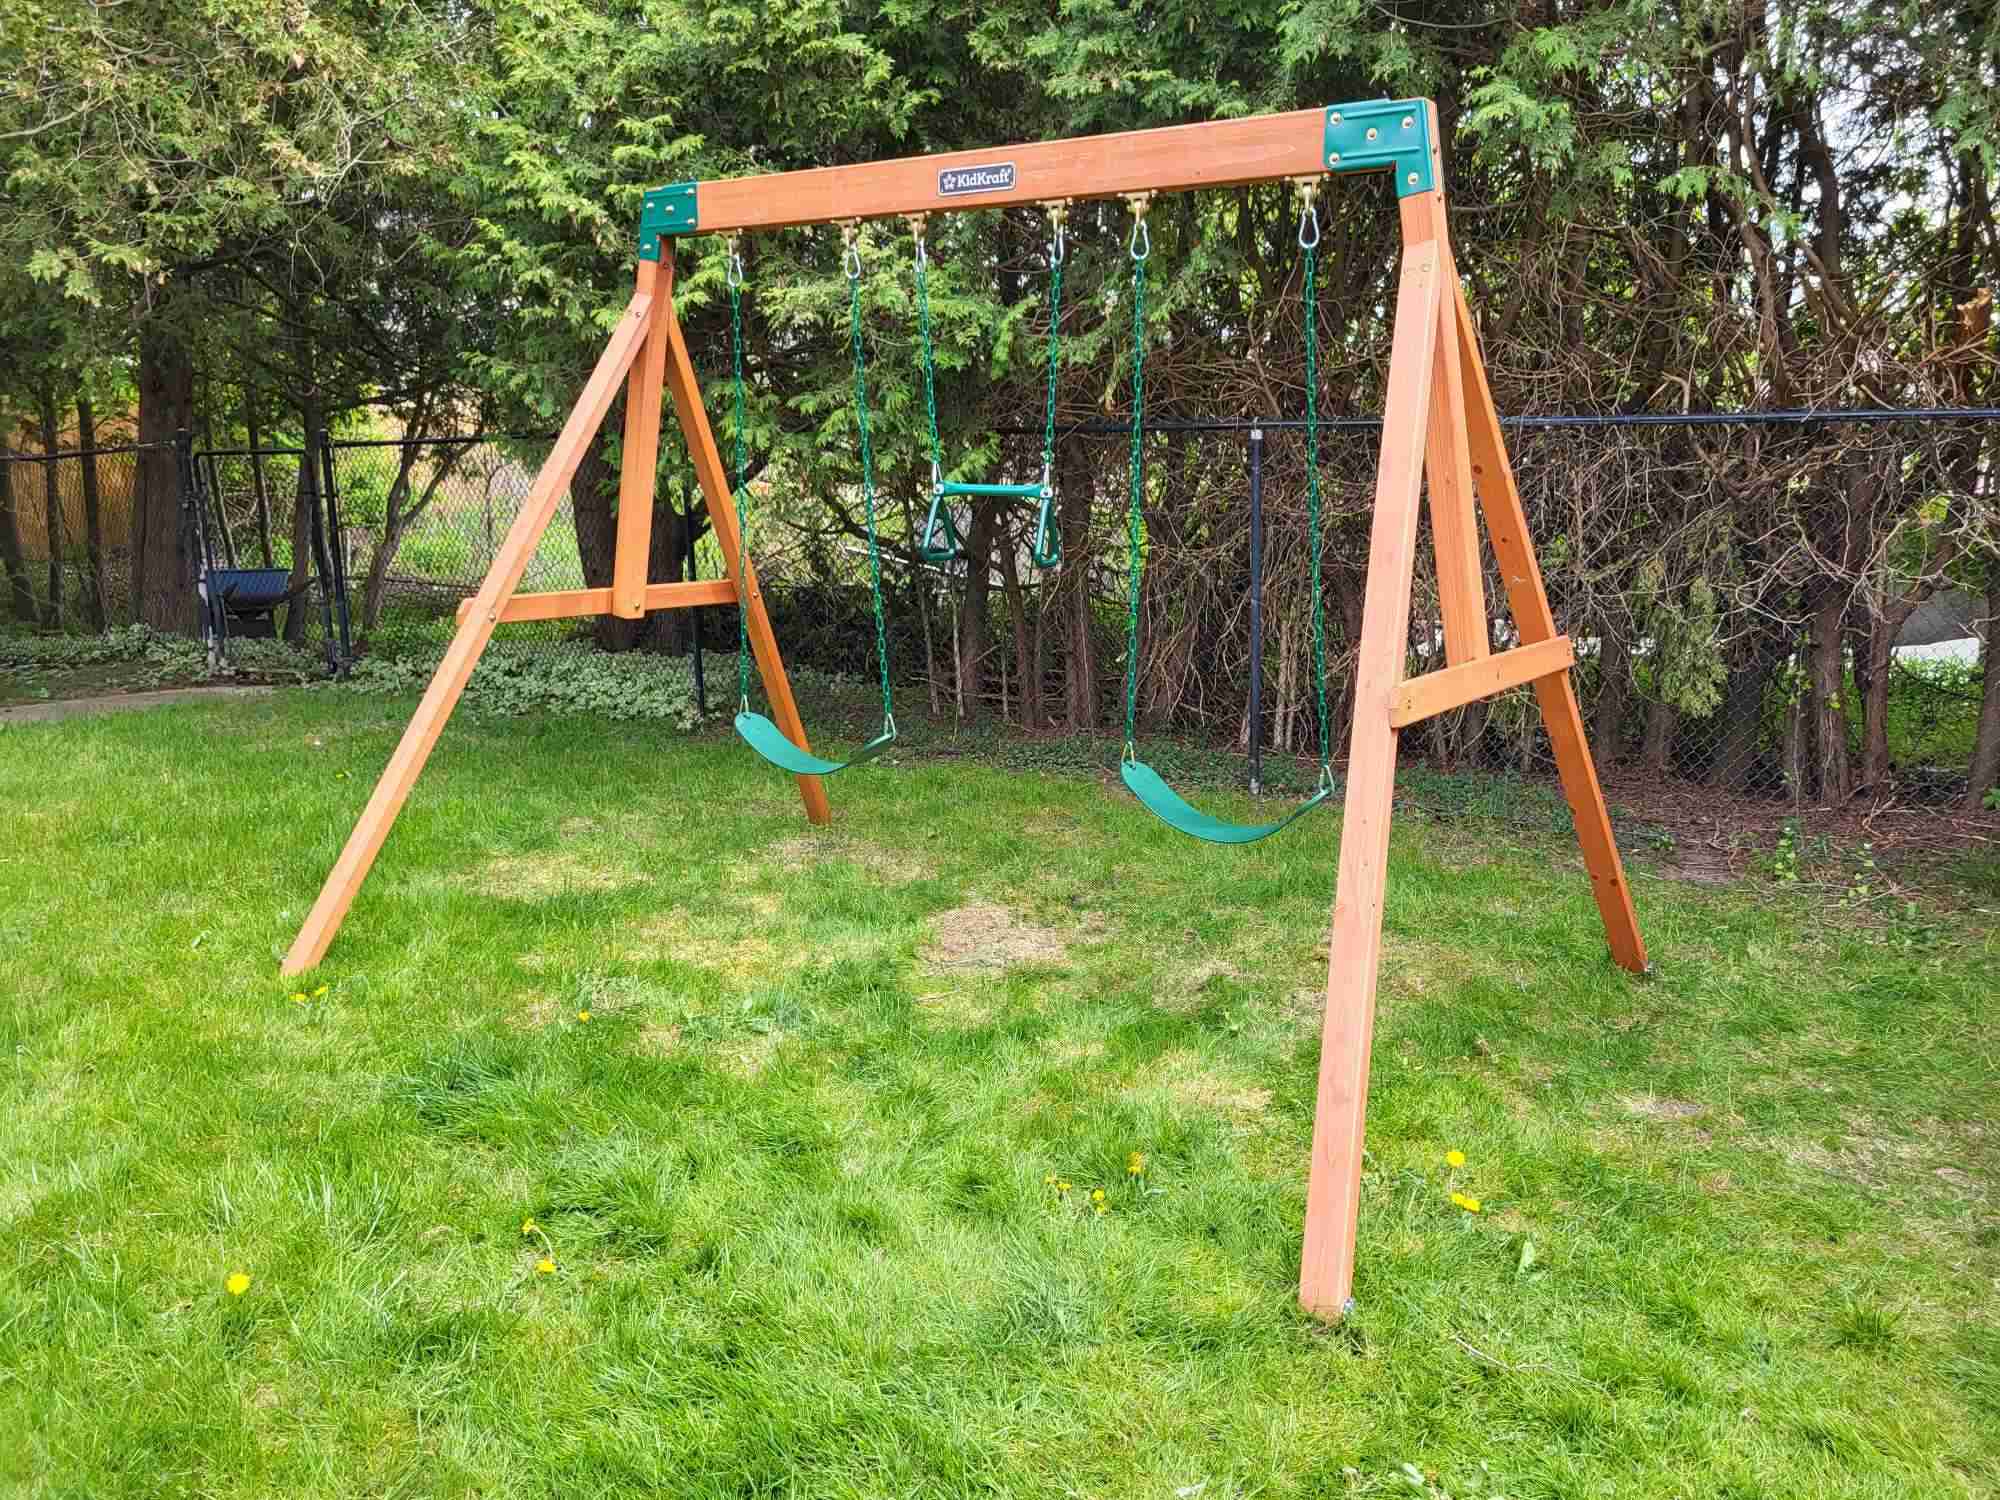 Swing in the play area